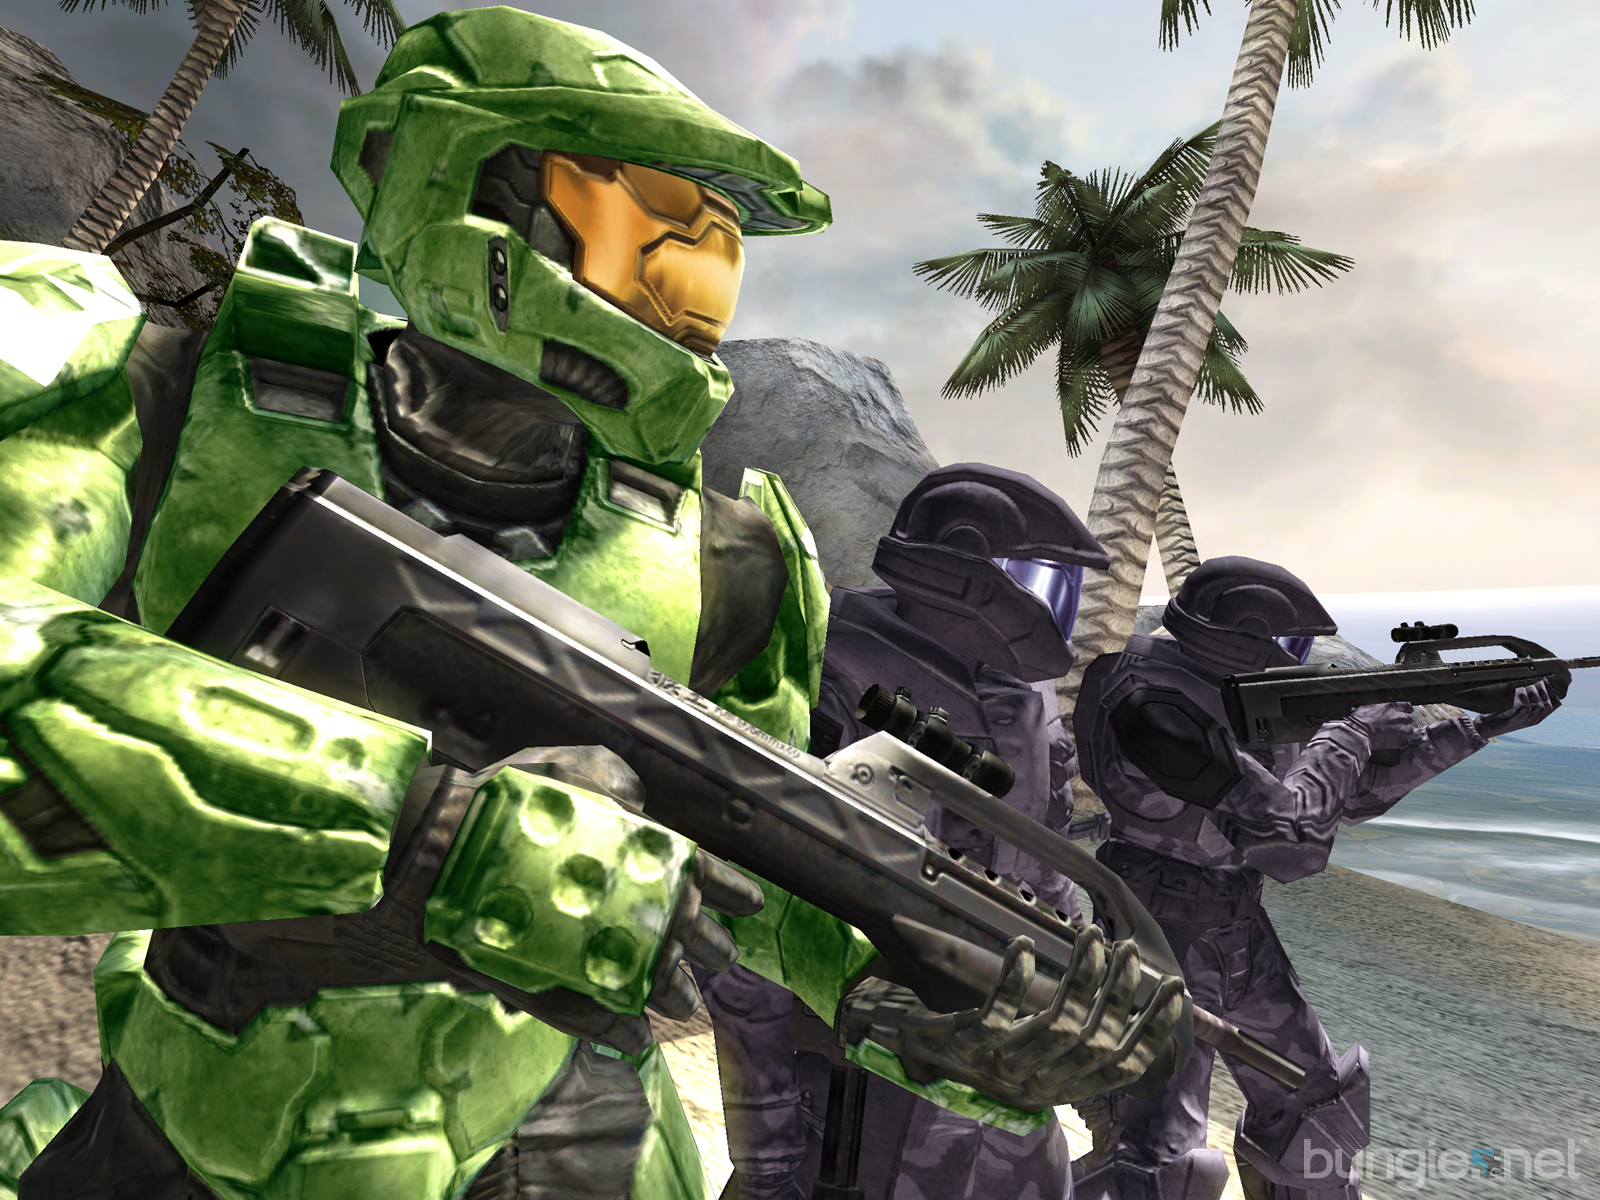 download halo 3 for pc free full version crack